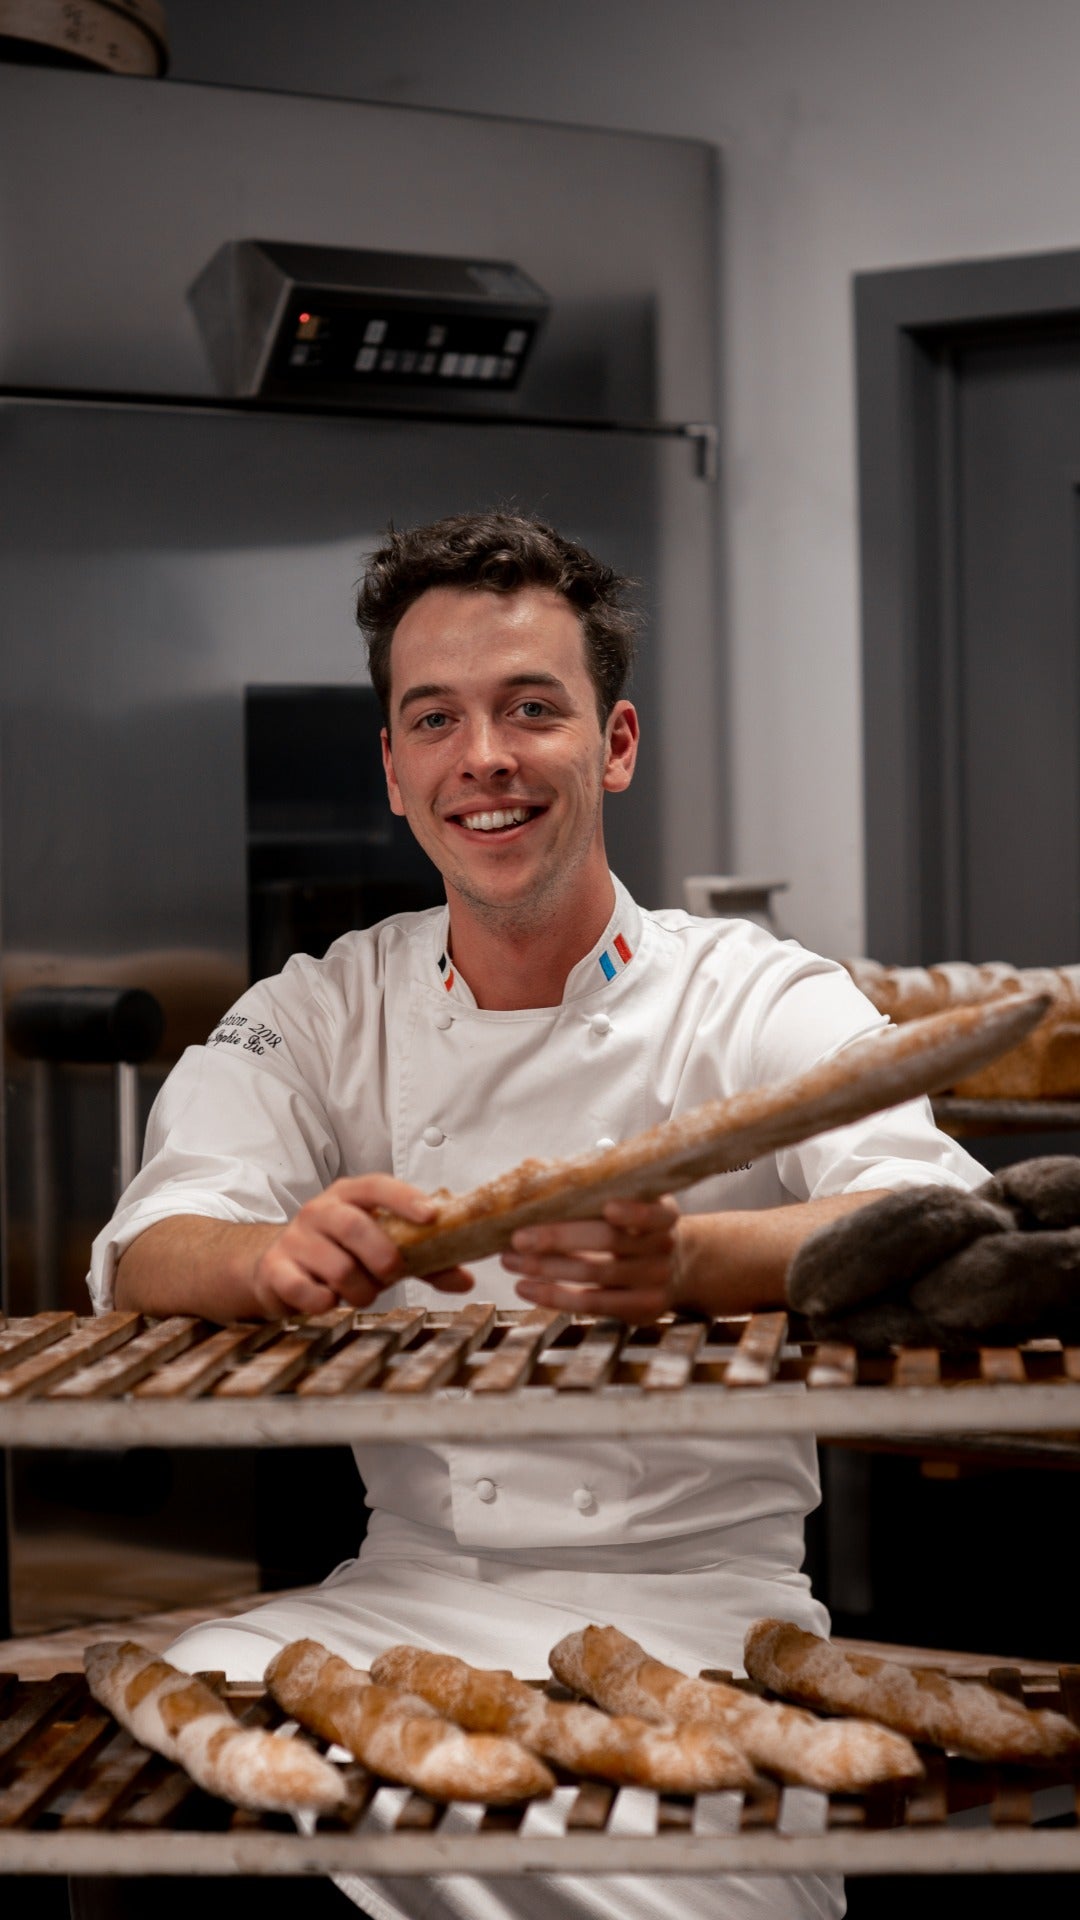 Picture of Master Chef Sébastien in his chef suit while holding one of its creations, namely a baguette tradition.